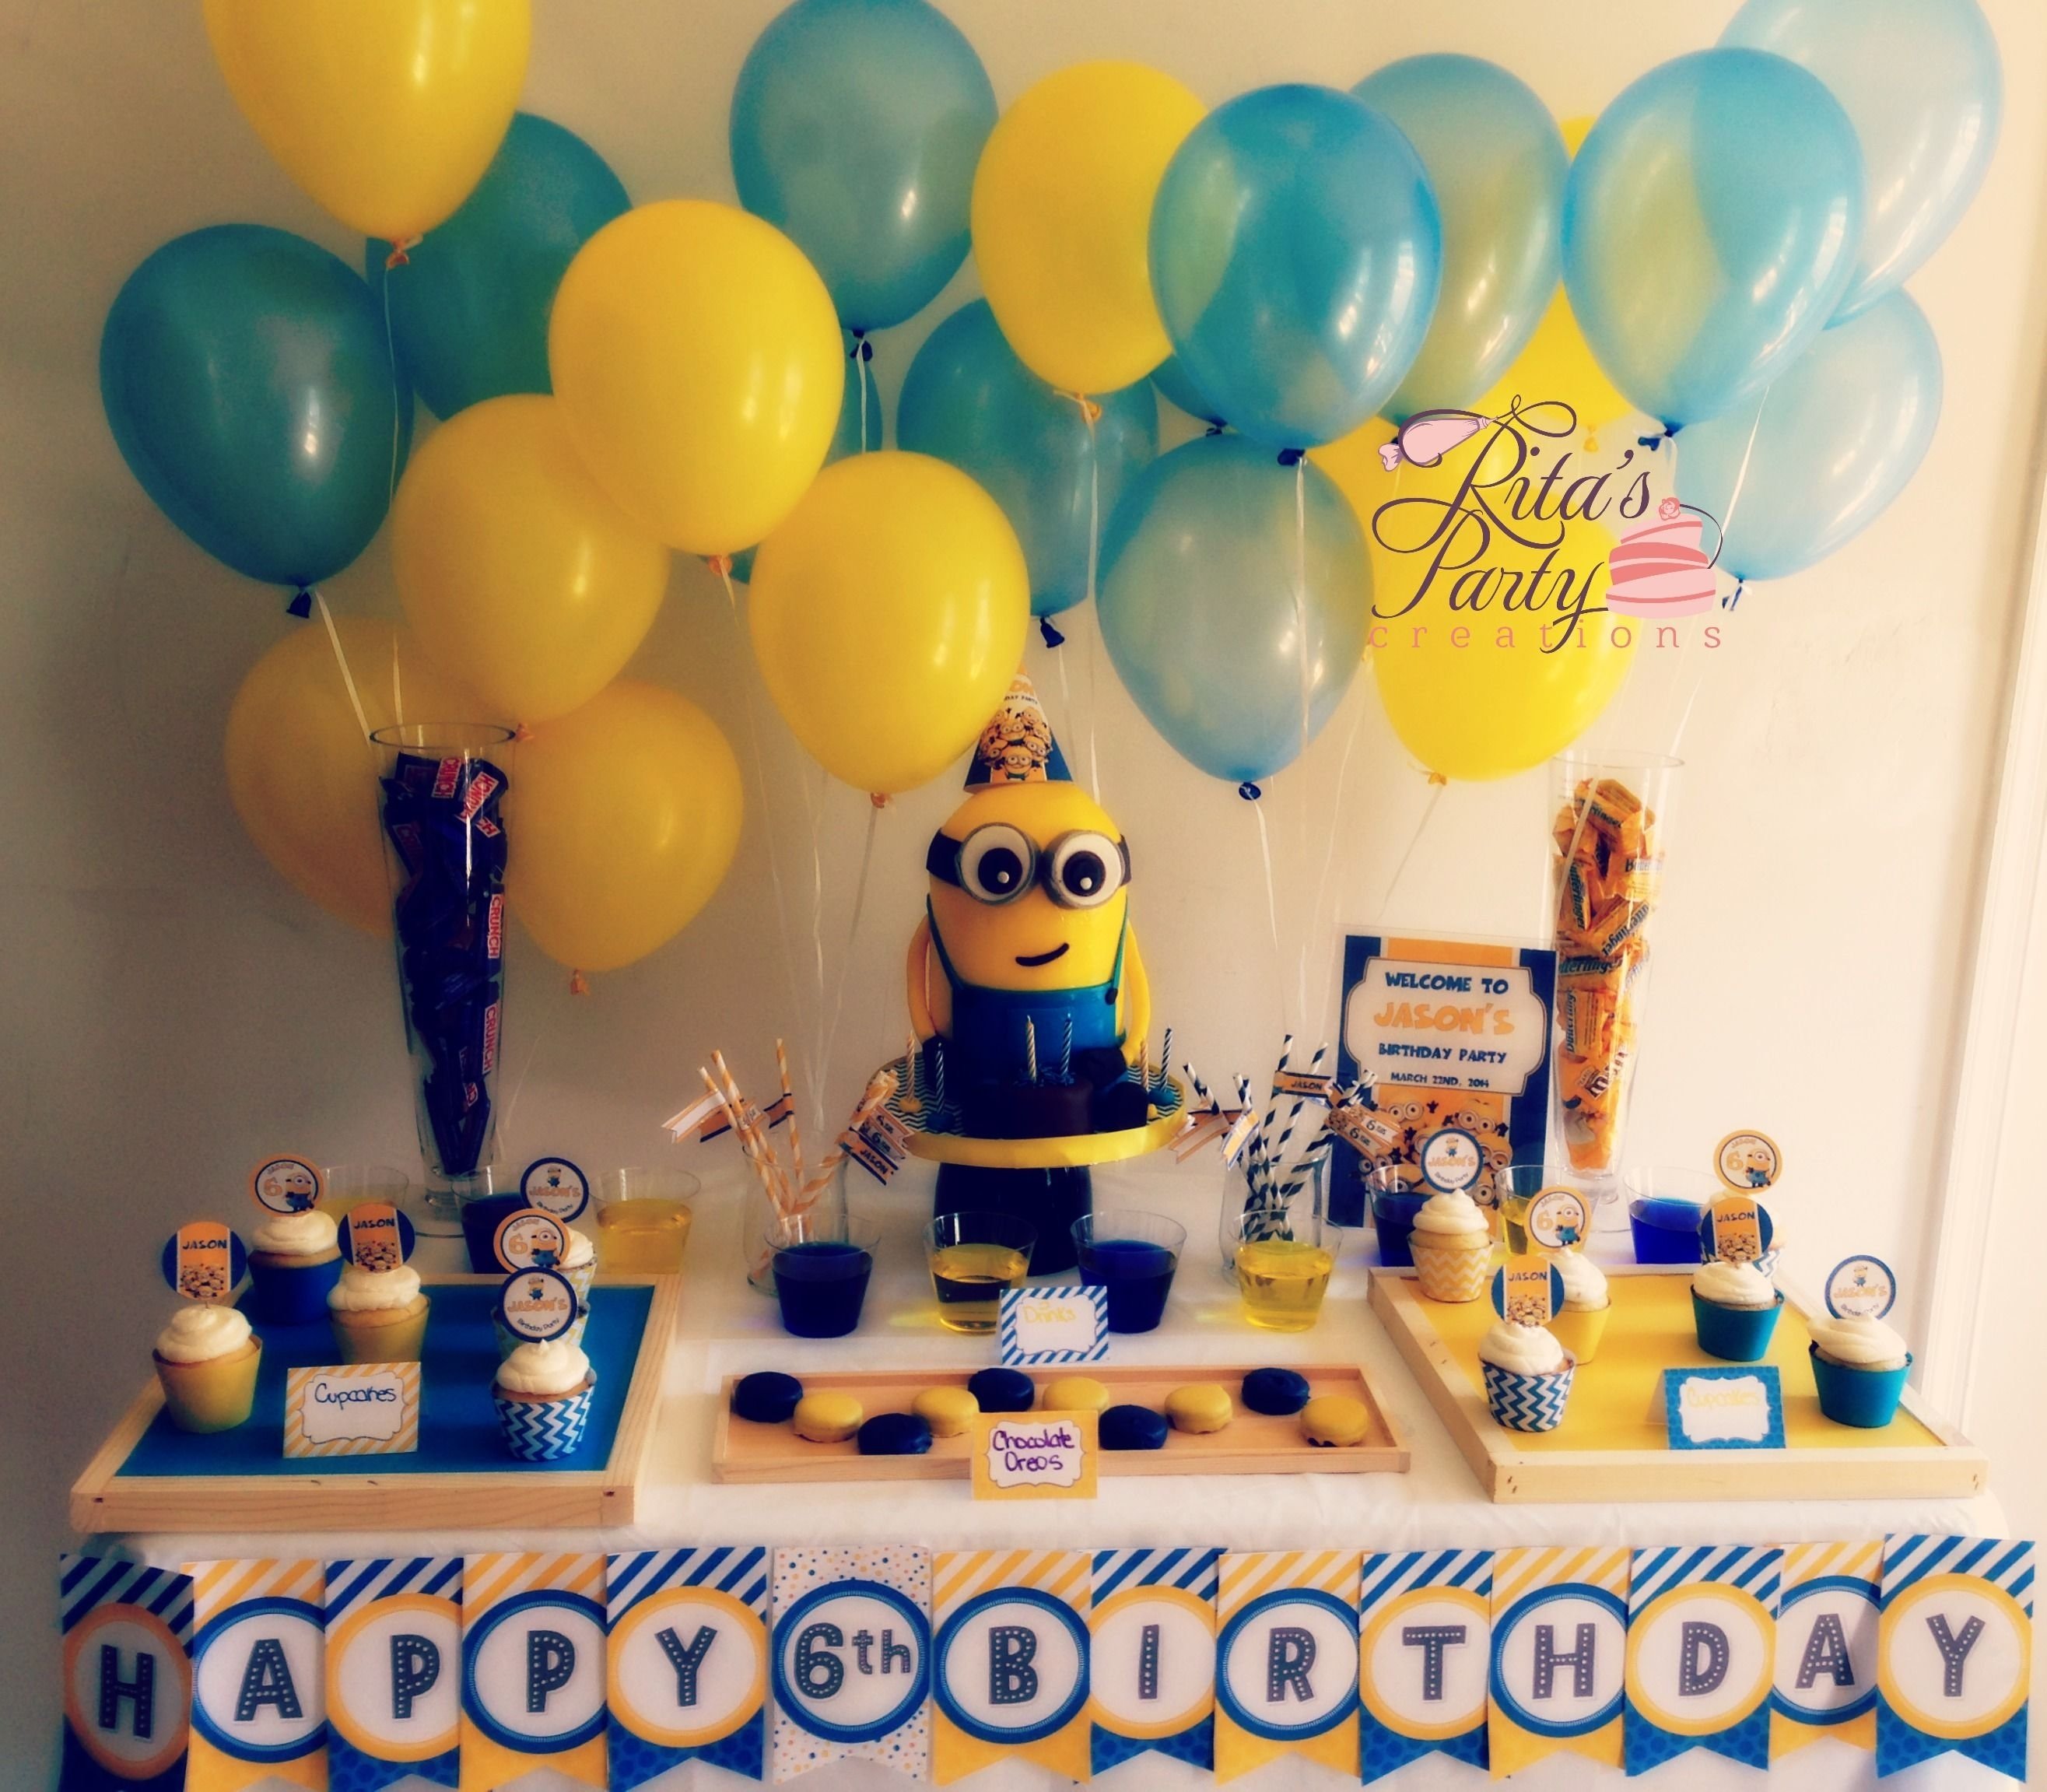 10 Fashionable Birthday Party Ideas For 6 Year Olds despicable me party table for a 6 year old boy birthday cake in 6 2022